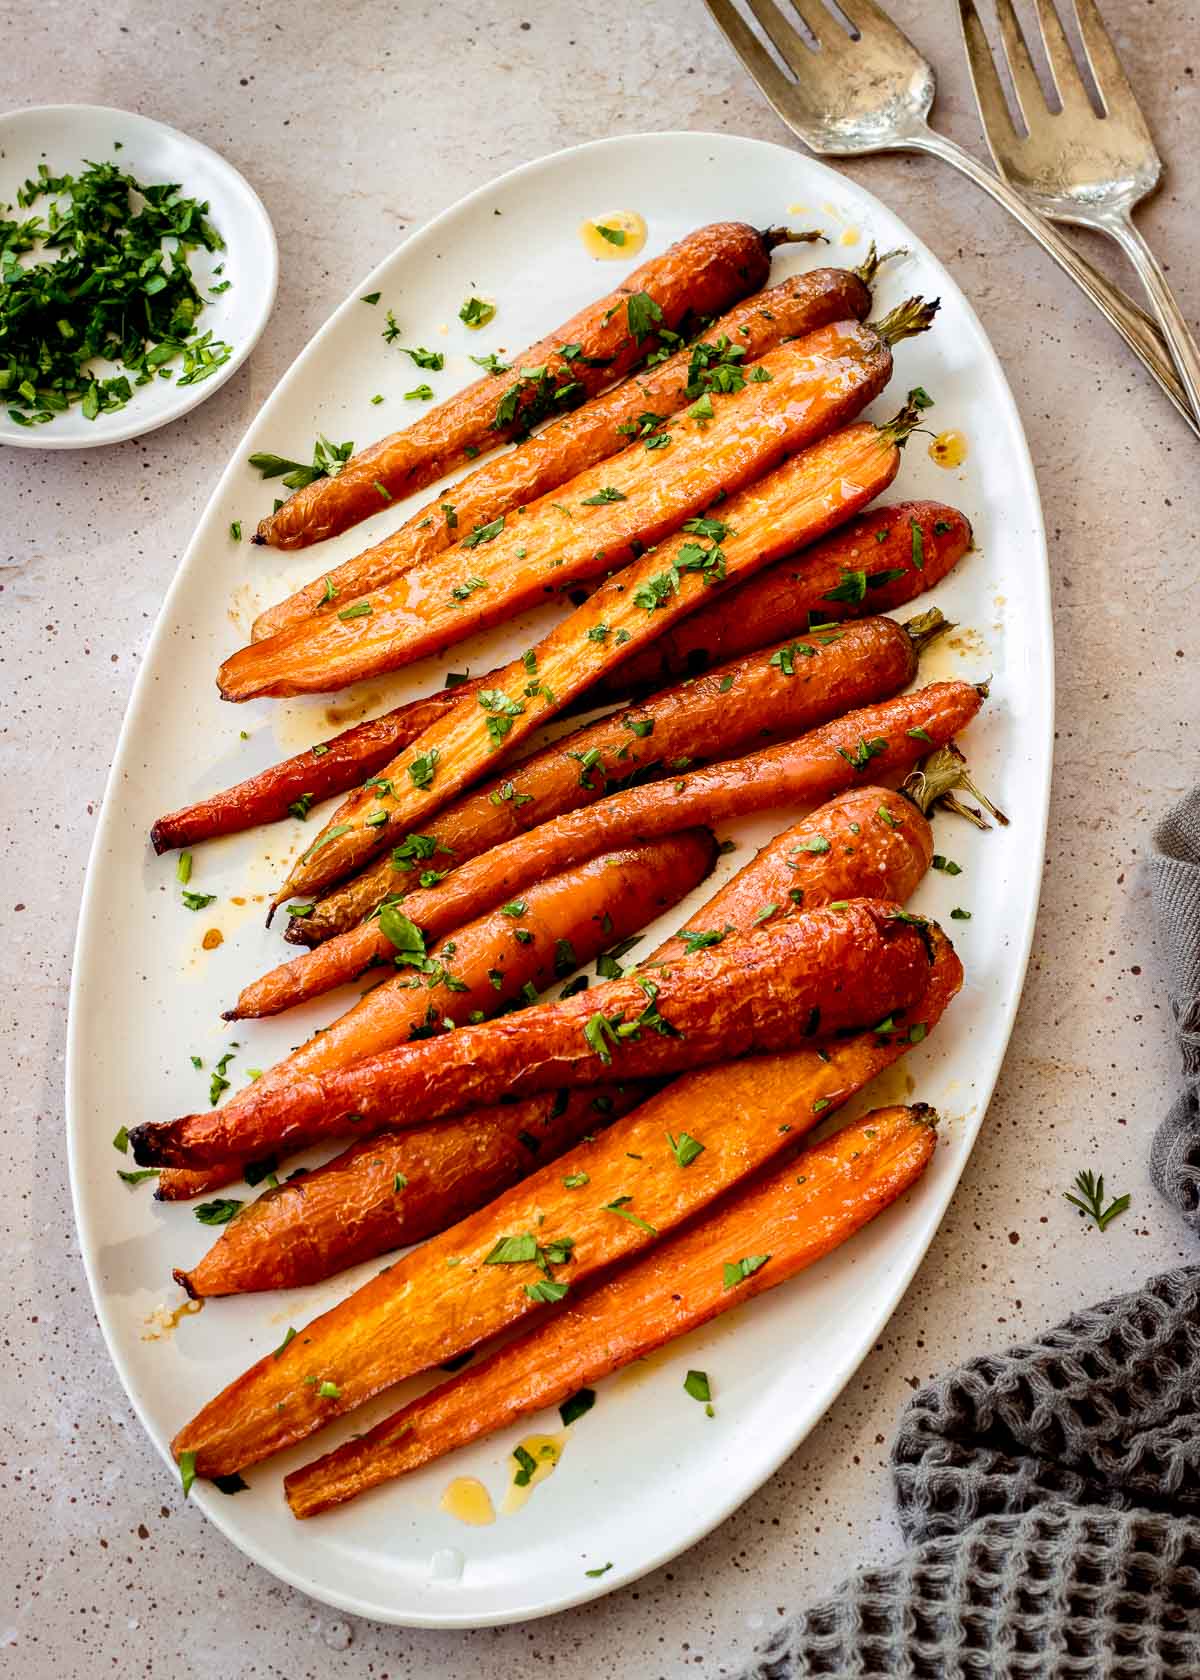 Halved maple roasted carrots on a white oblong plate, decorated with chopped parsley. Two large silver serving spoons and more parsley are nearby.